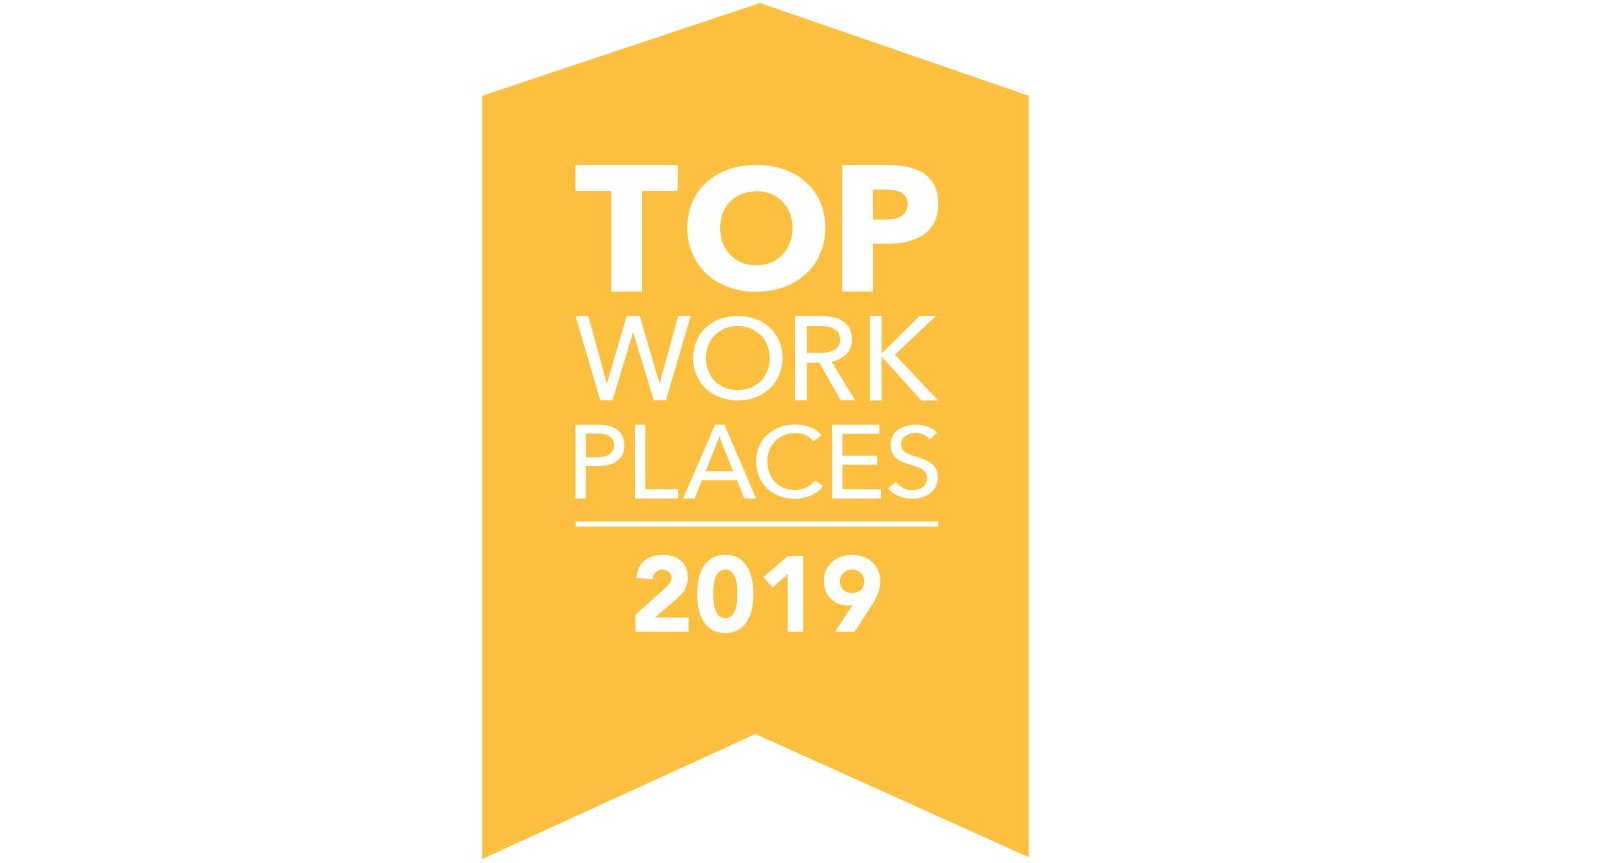 Top workplaces 2019 logo.